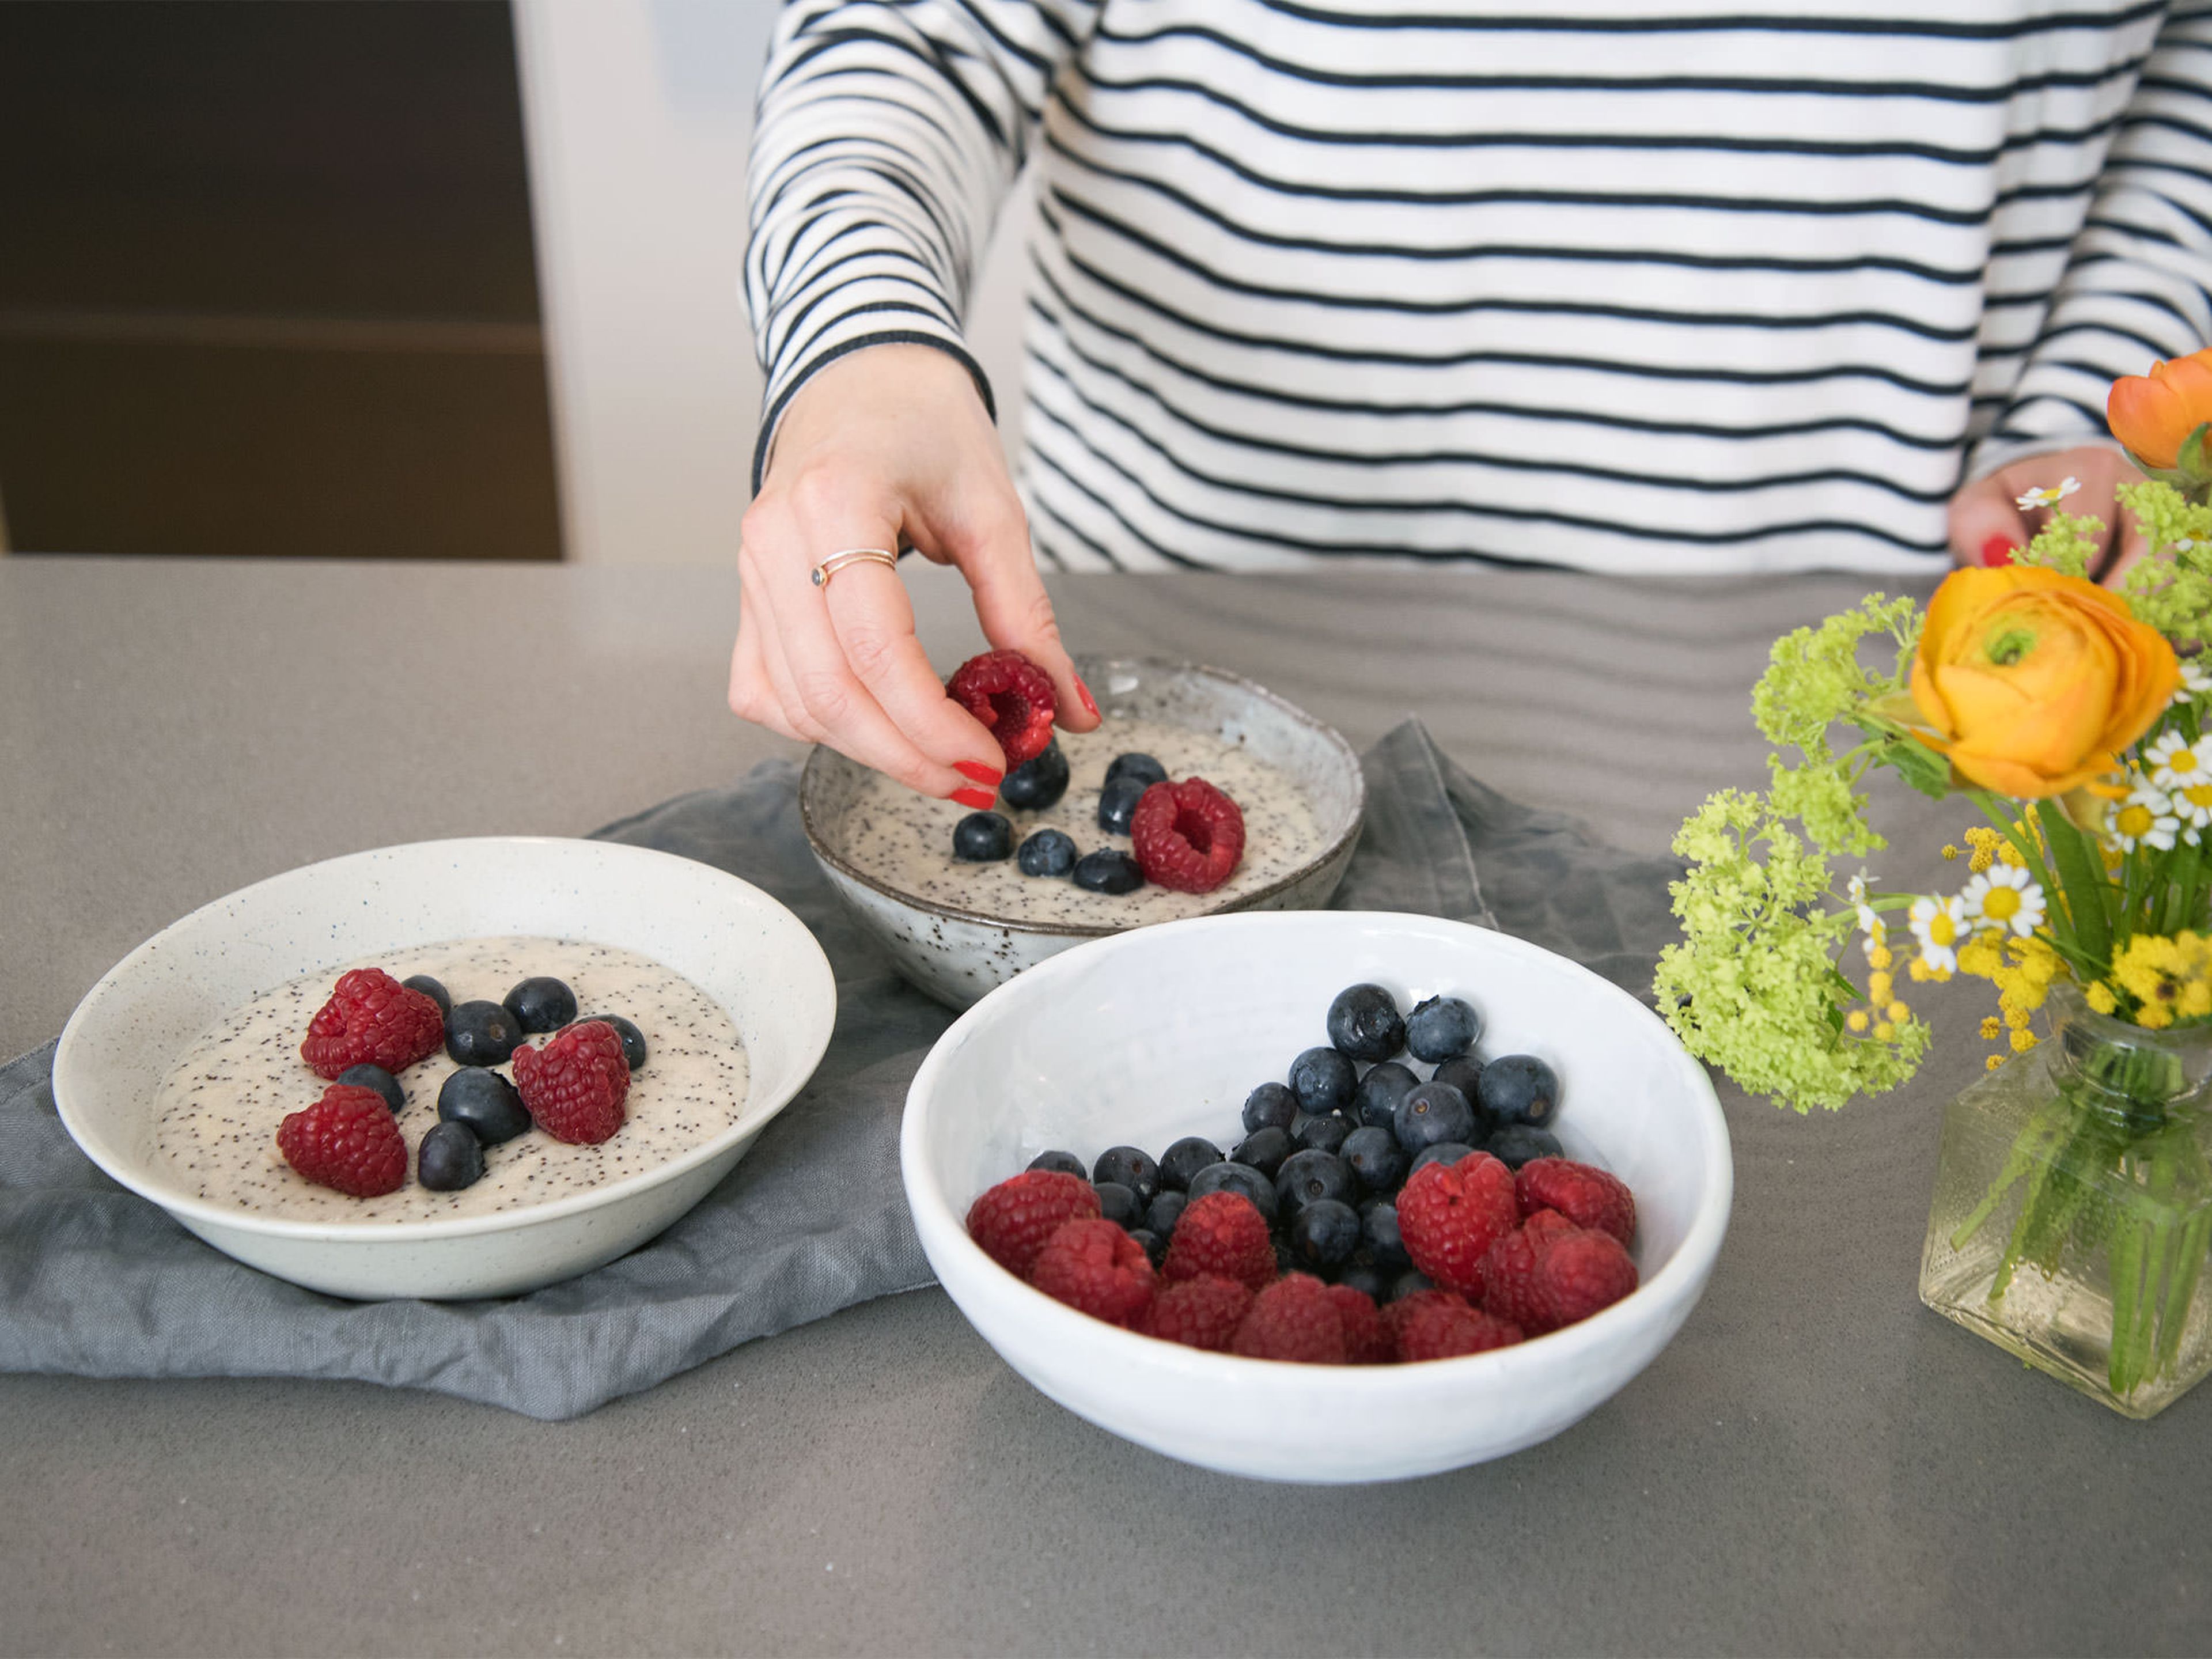 While still hot, transfer porridge to serving bowls and let sit for approx. 5 – 10 min. Garnish with berries and top with more maple syrup, if desired. Enjoy!